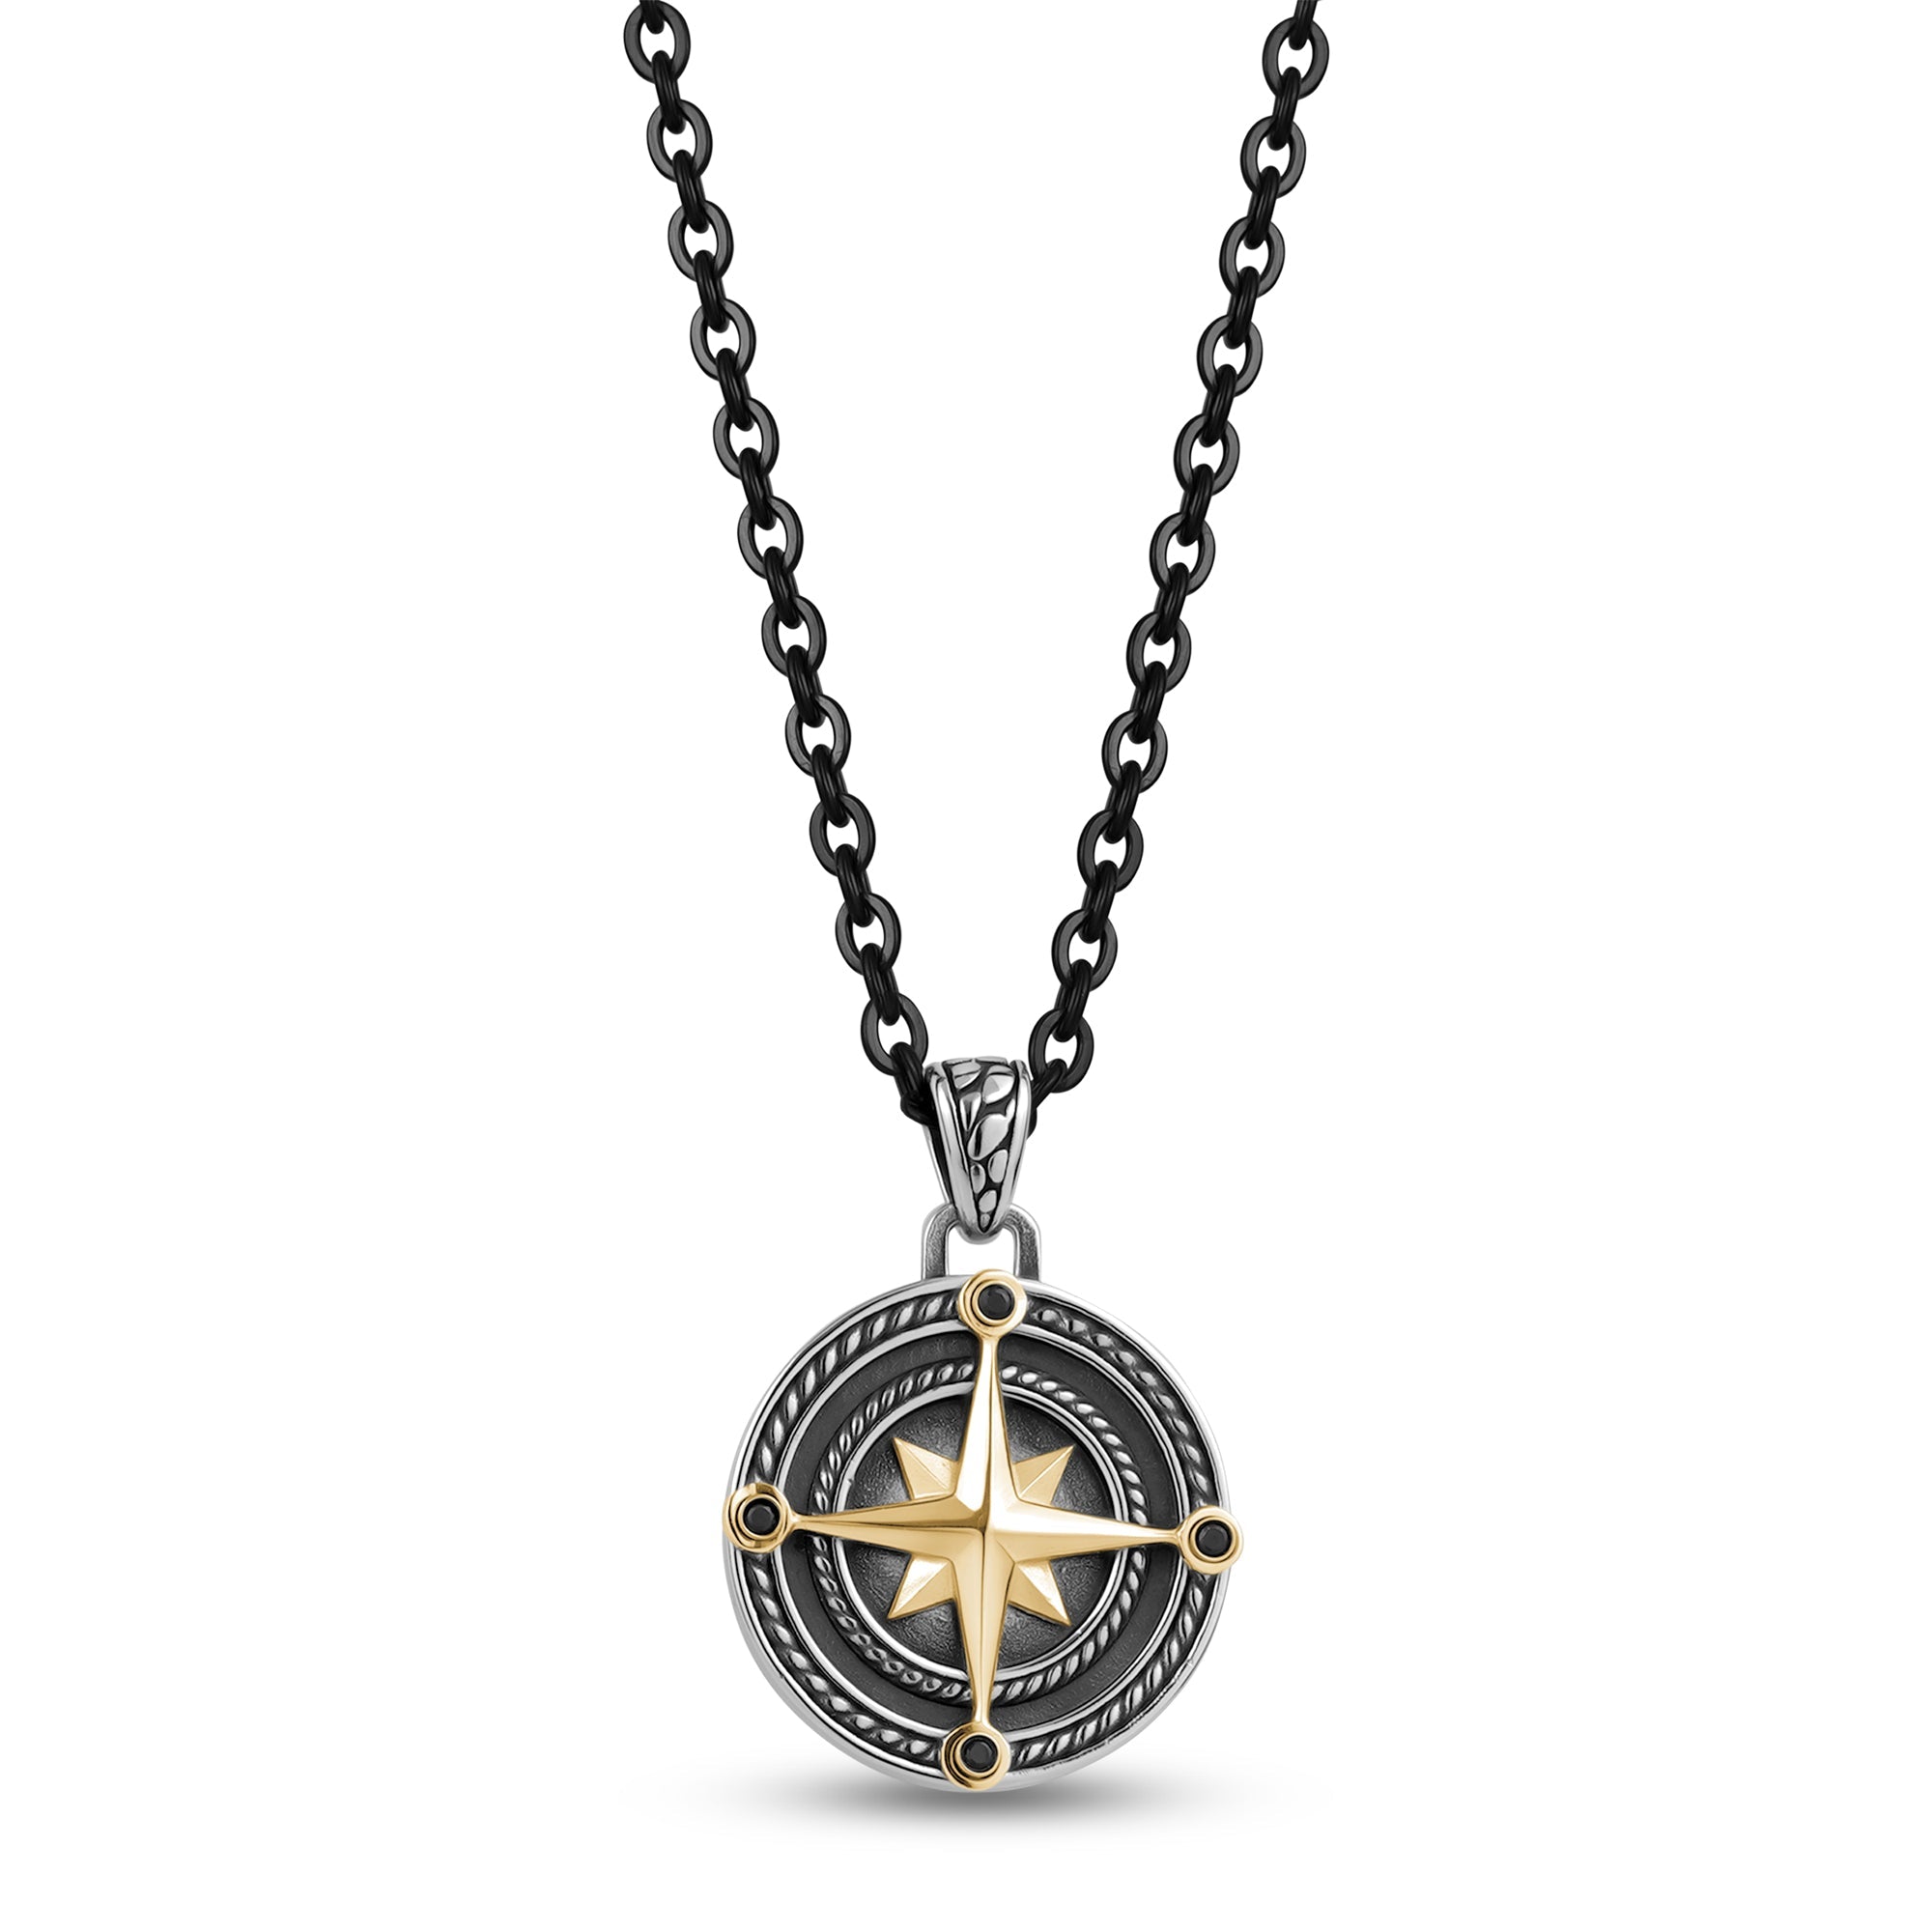 Mens Necklace, Compass Necklace, Travel Necklace, North Star, Stainless  Steel, Free Tracked Shipping, Gift for Him, Chain & Pendant, - Etsy